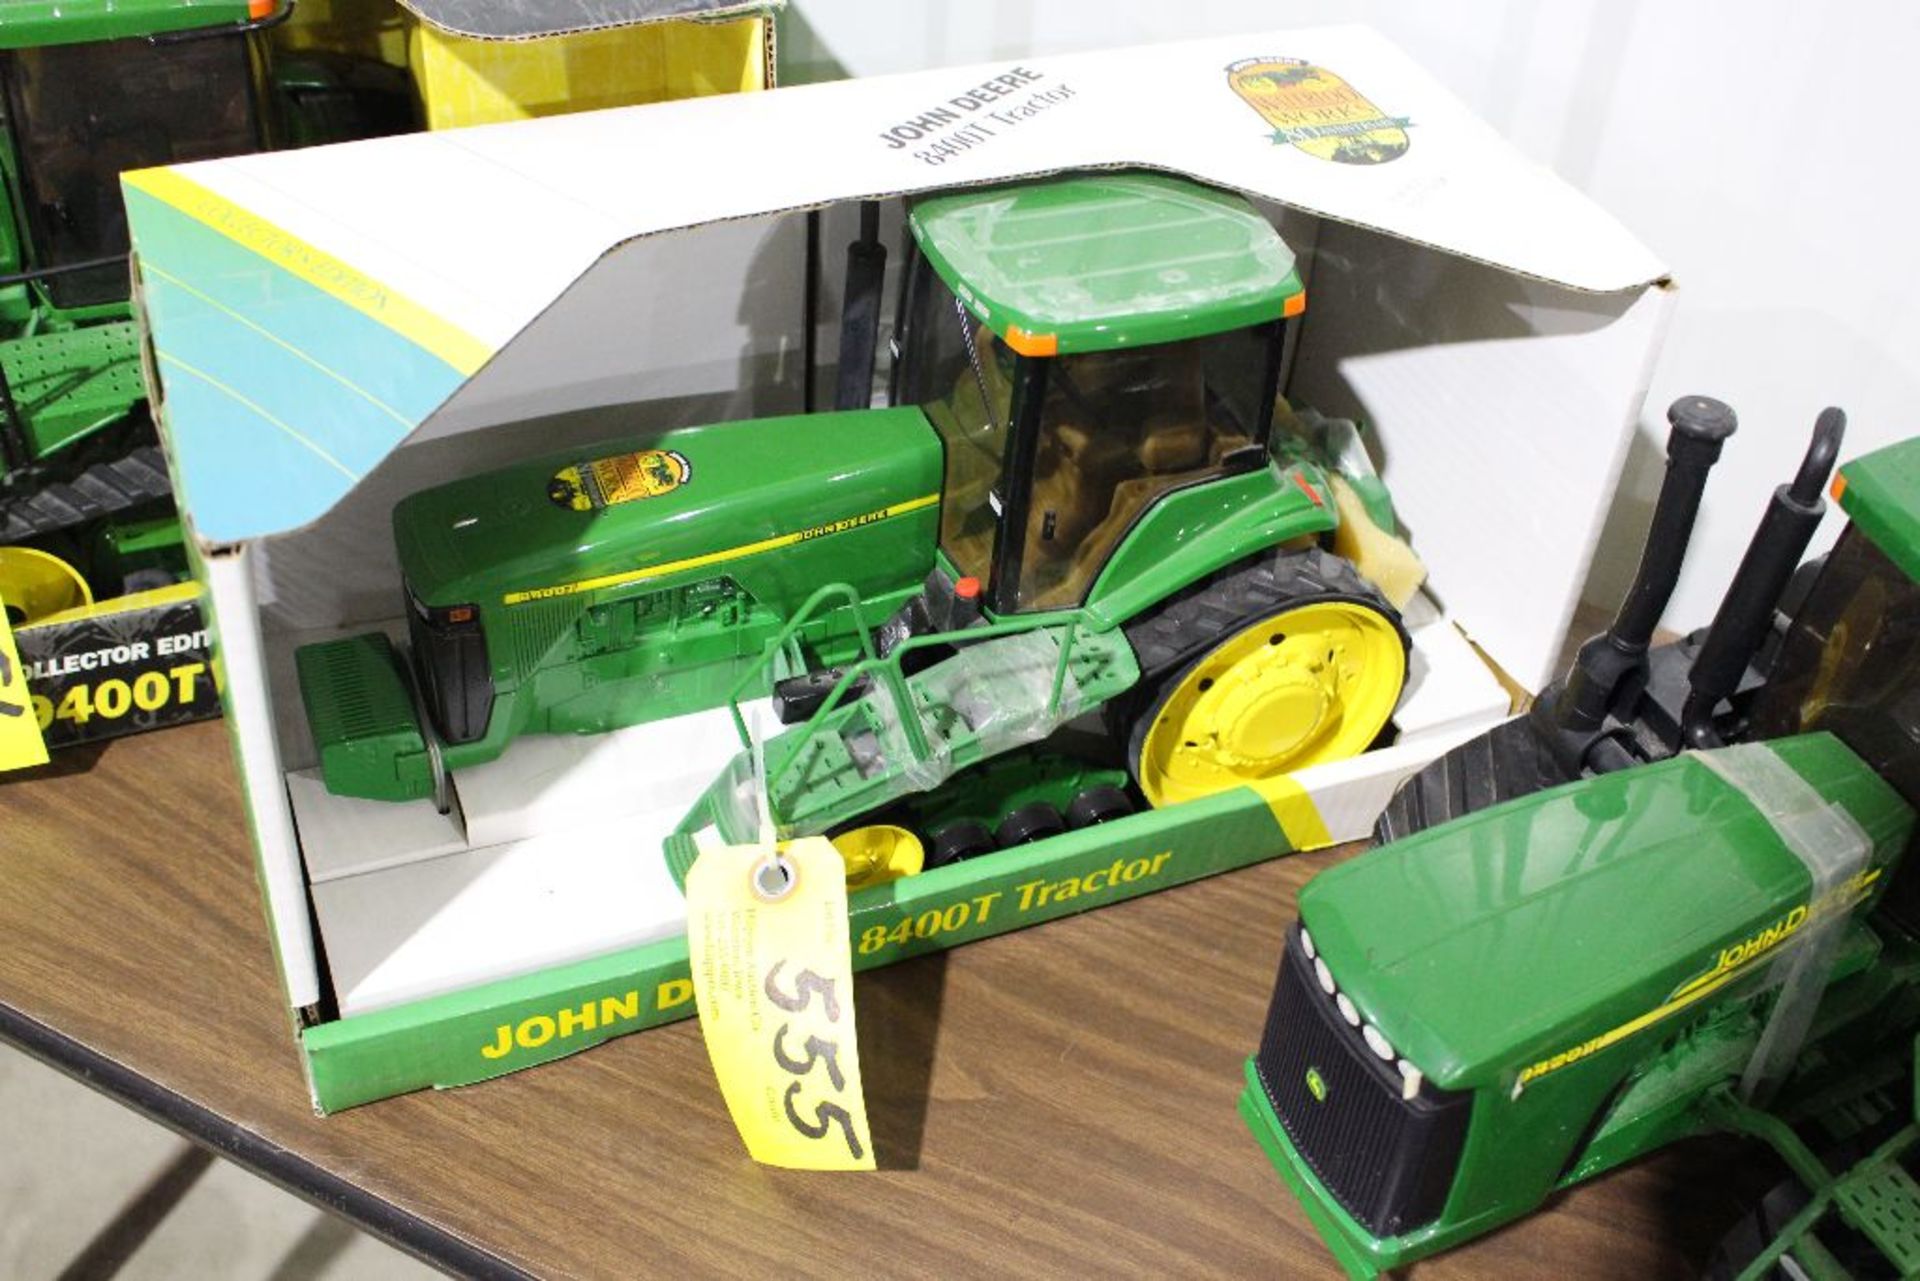 John Deere 8400T, Collector's Edition, 80th anniversary, Waterloo works, in box, 1/16 scale model.